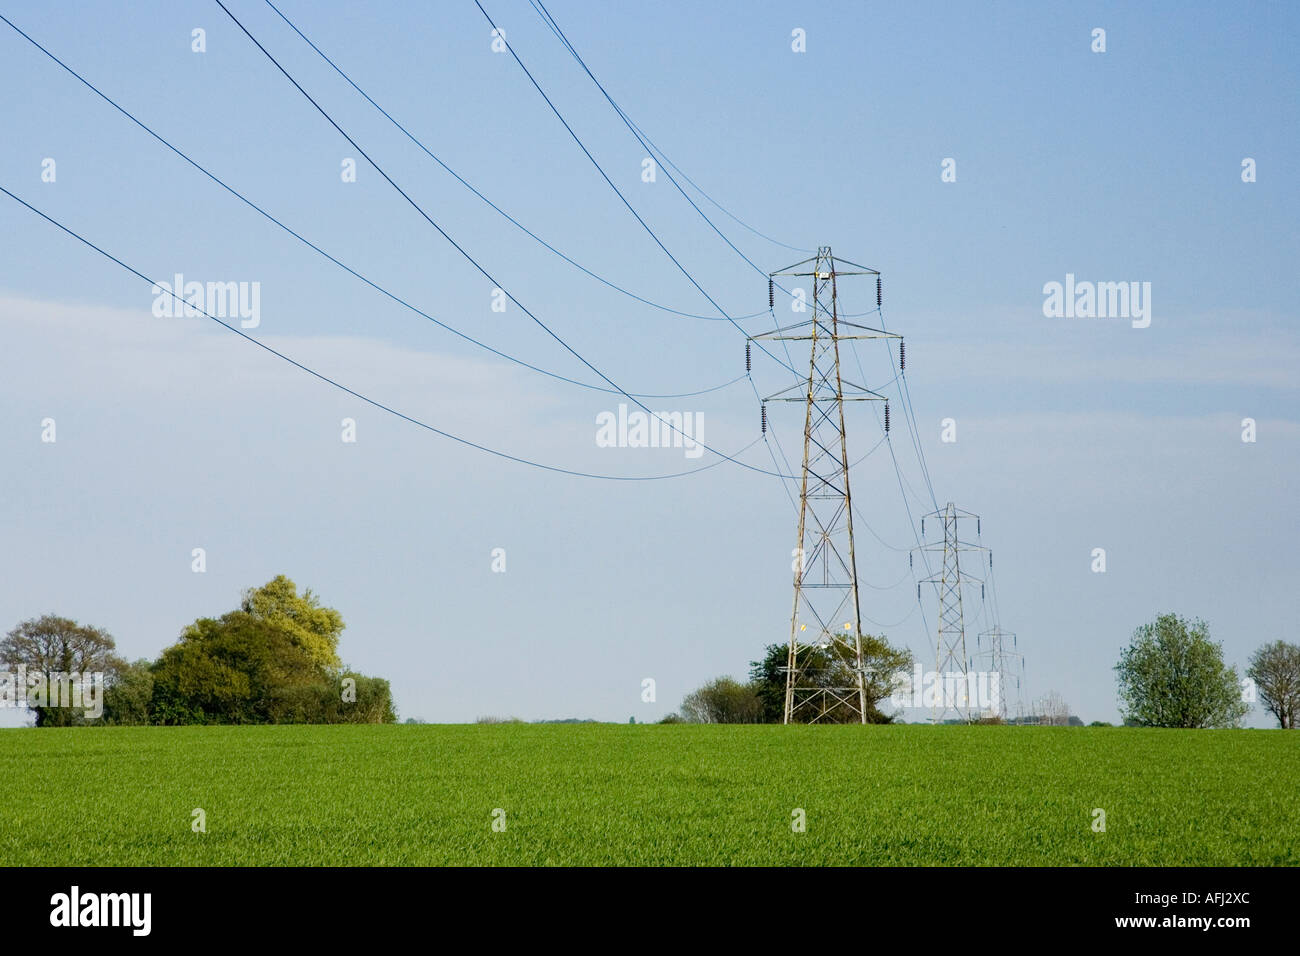 pylons and electricity power lines Stock Photo